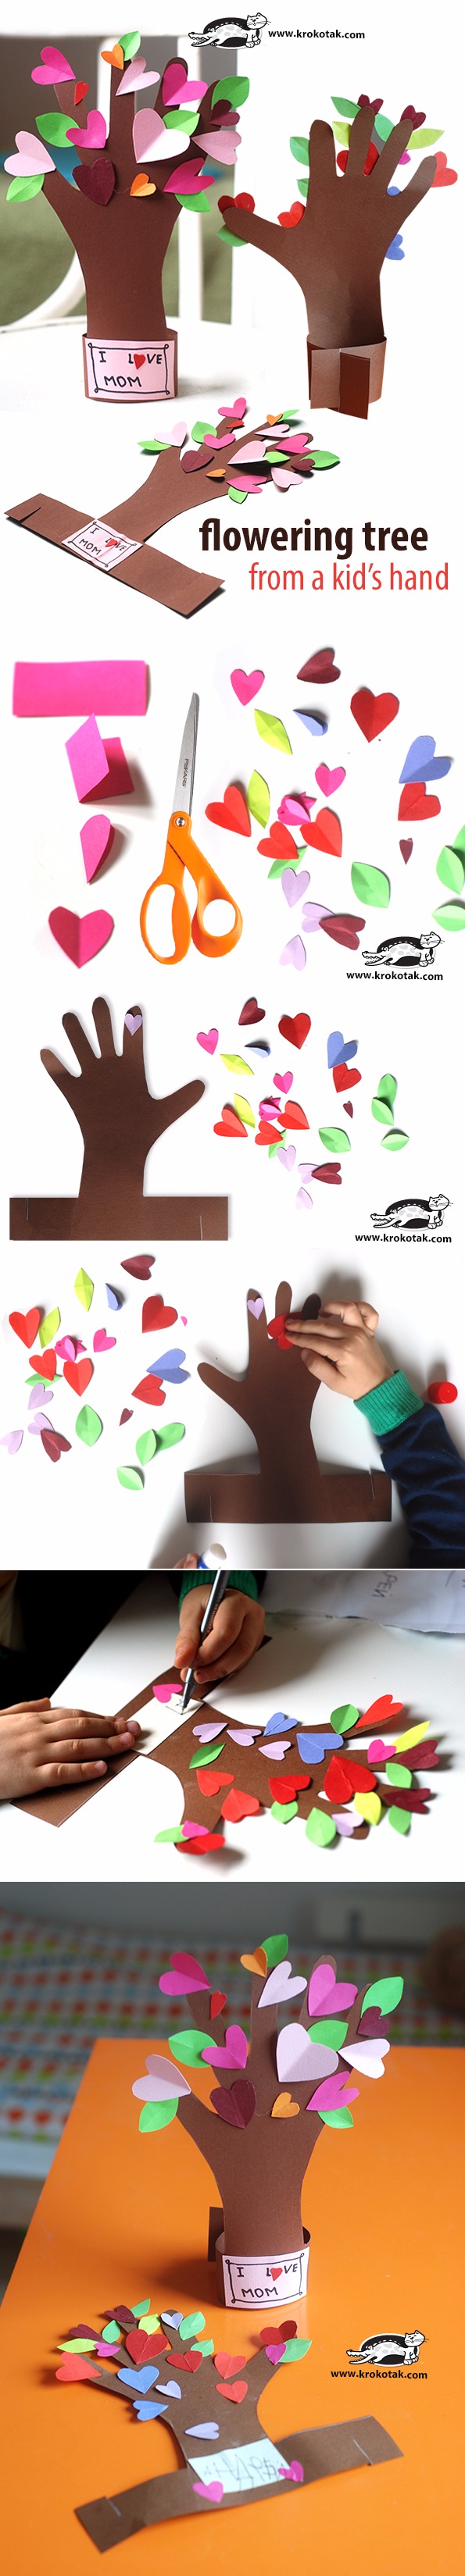 3-flowering-tree-from-a-kids-hand